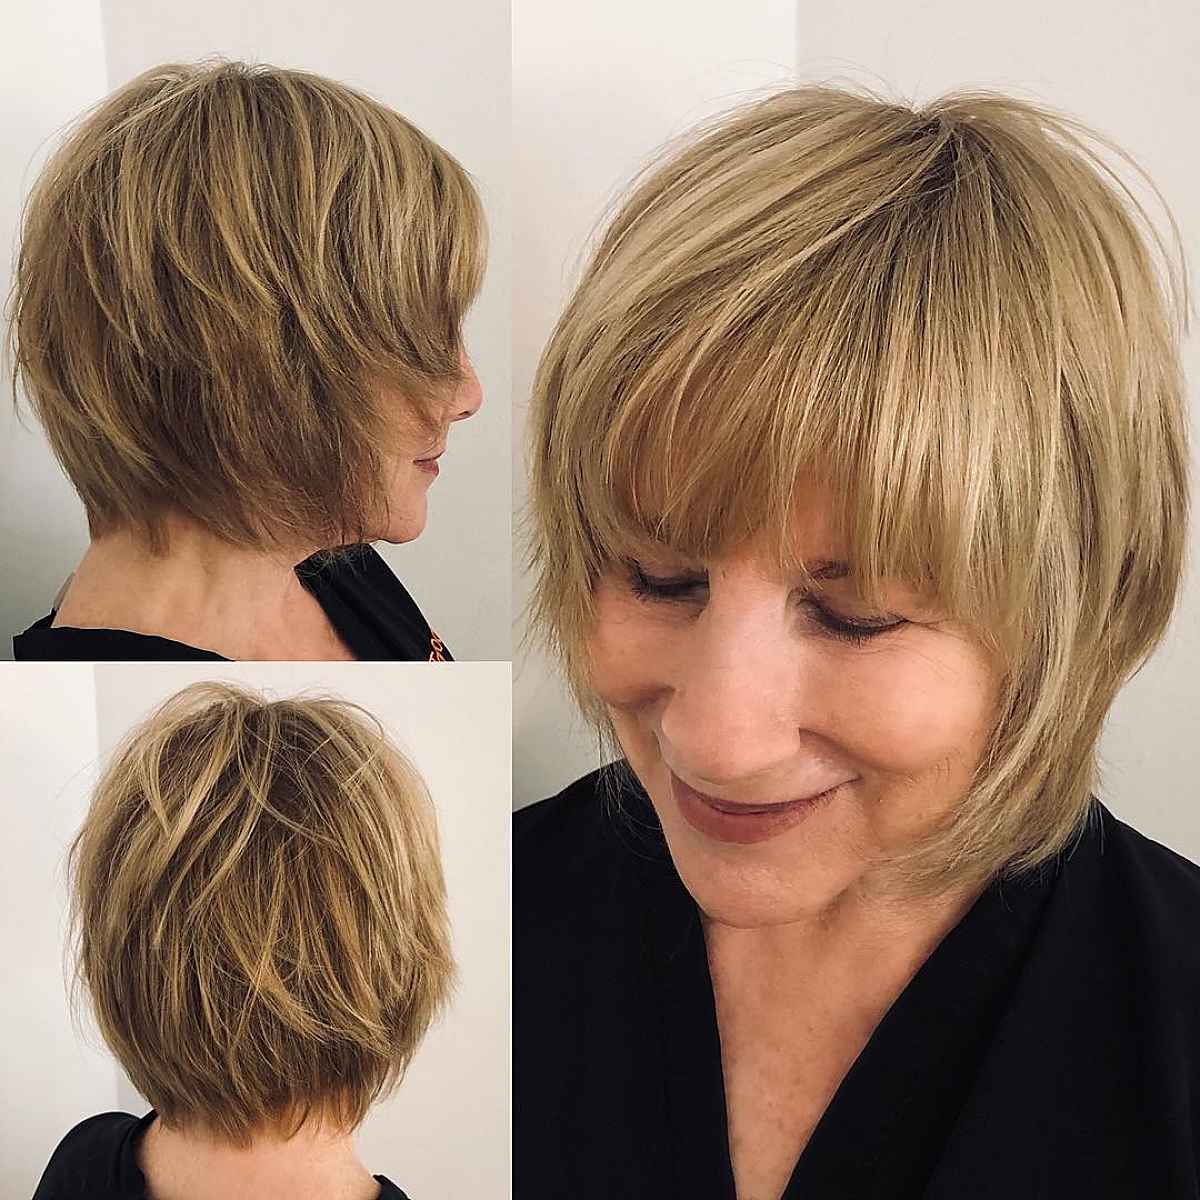 Layered and Textured Bob for Older Women